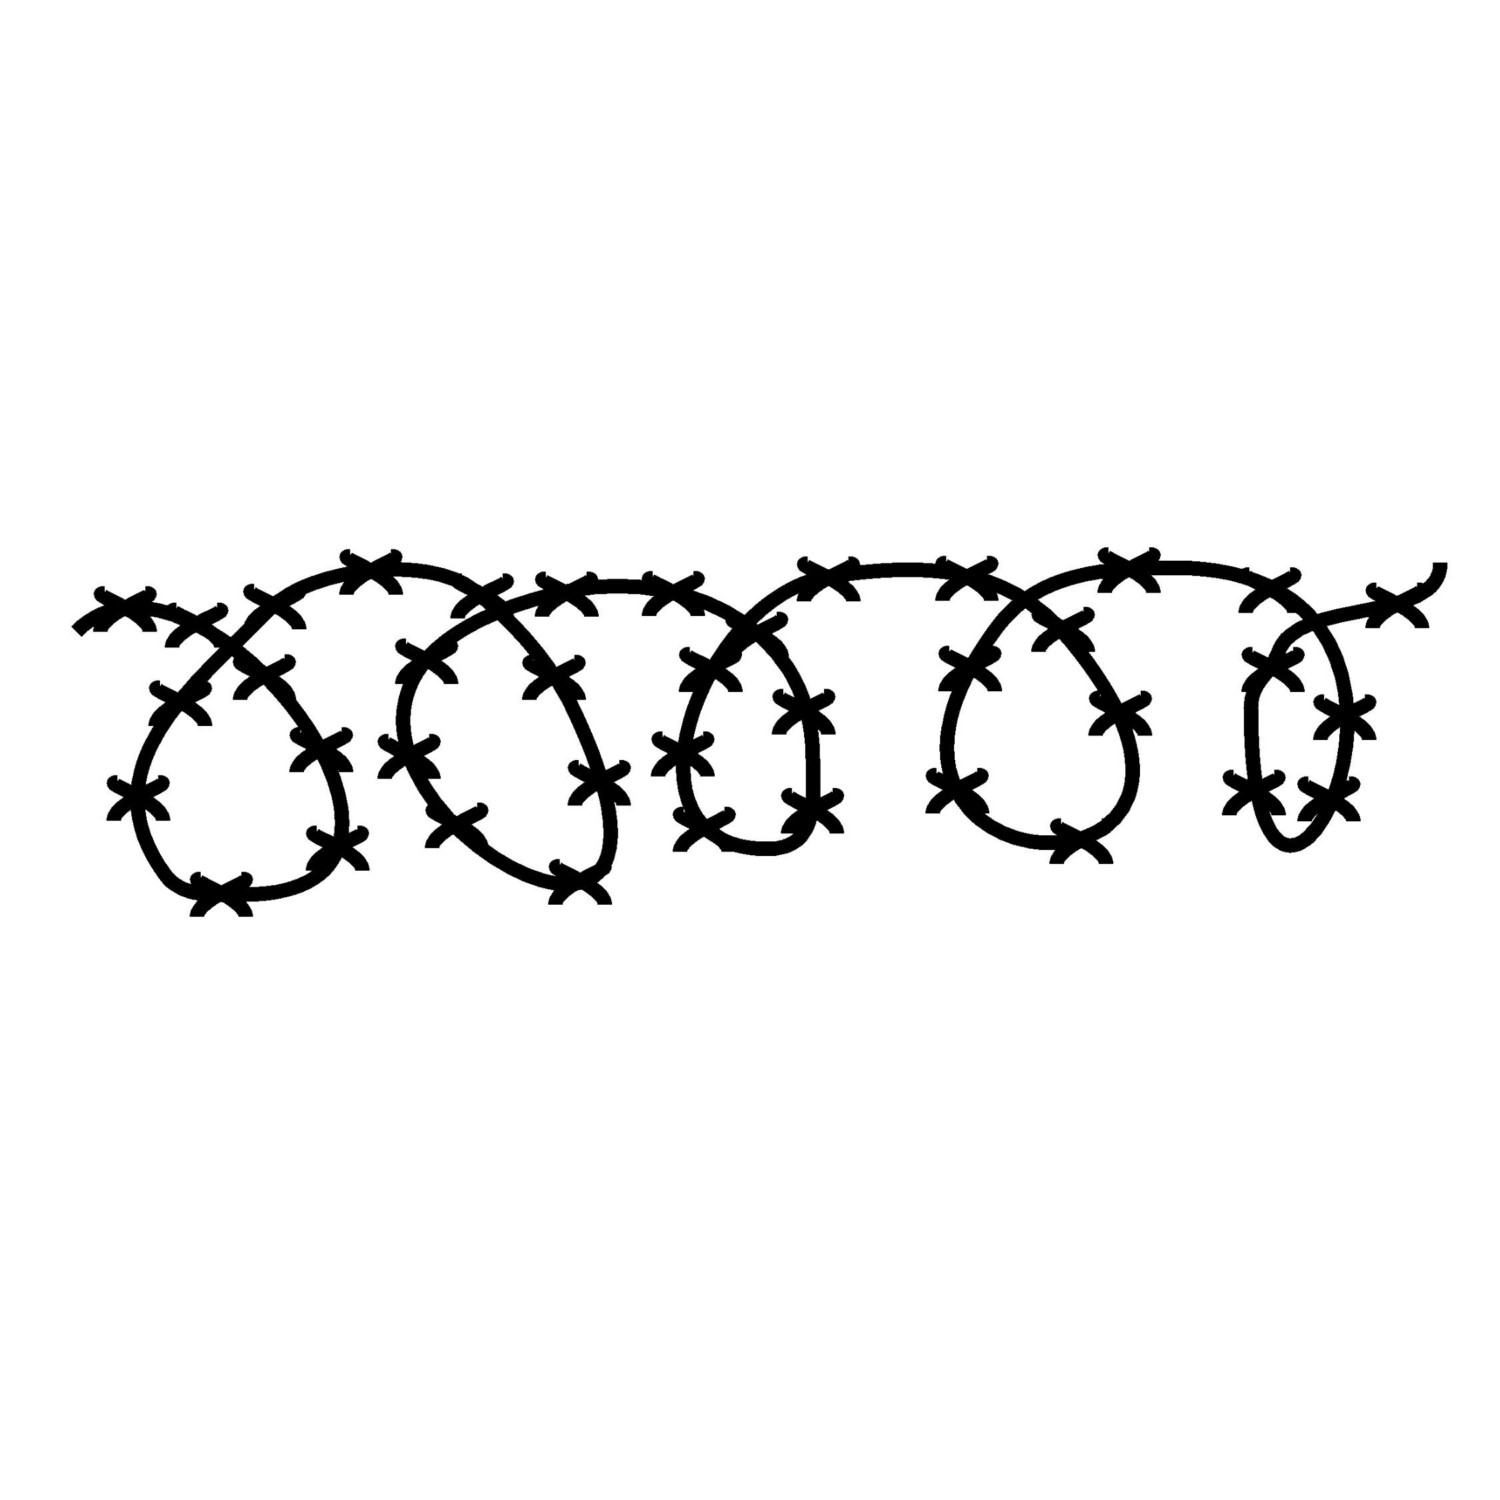 Barbed Wire Drawings - ClipArt Best